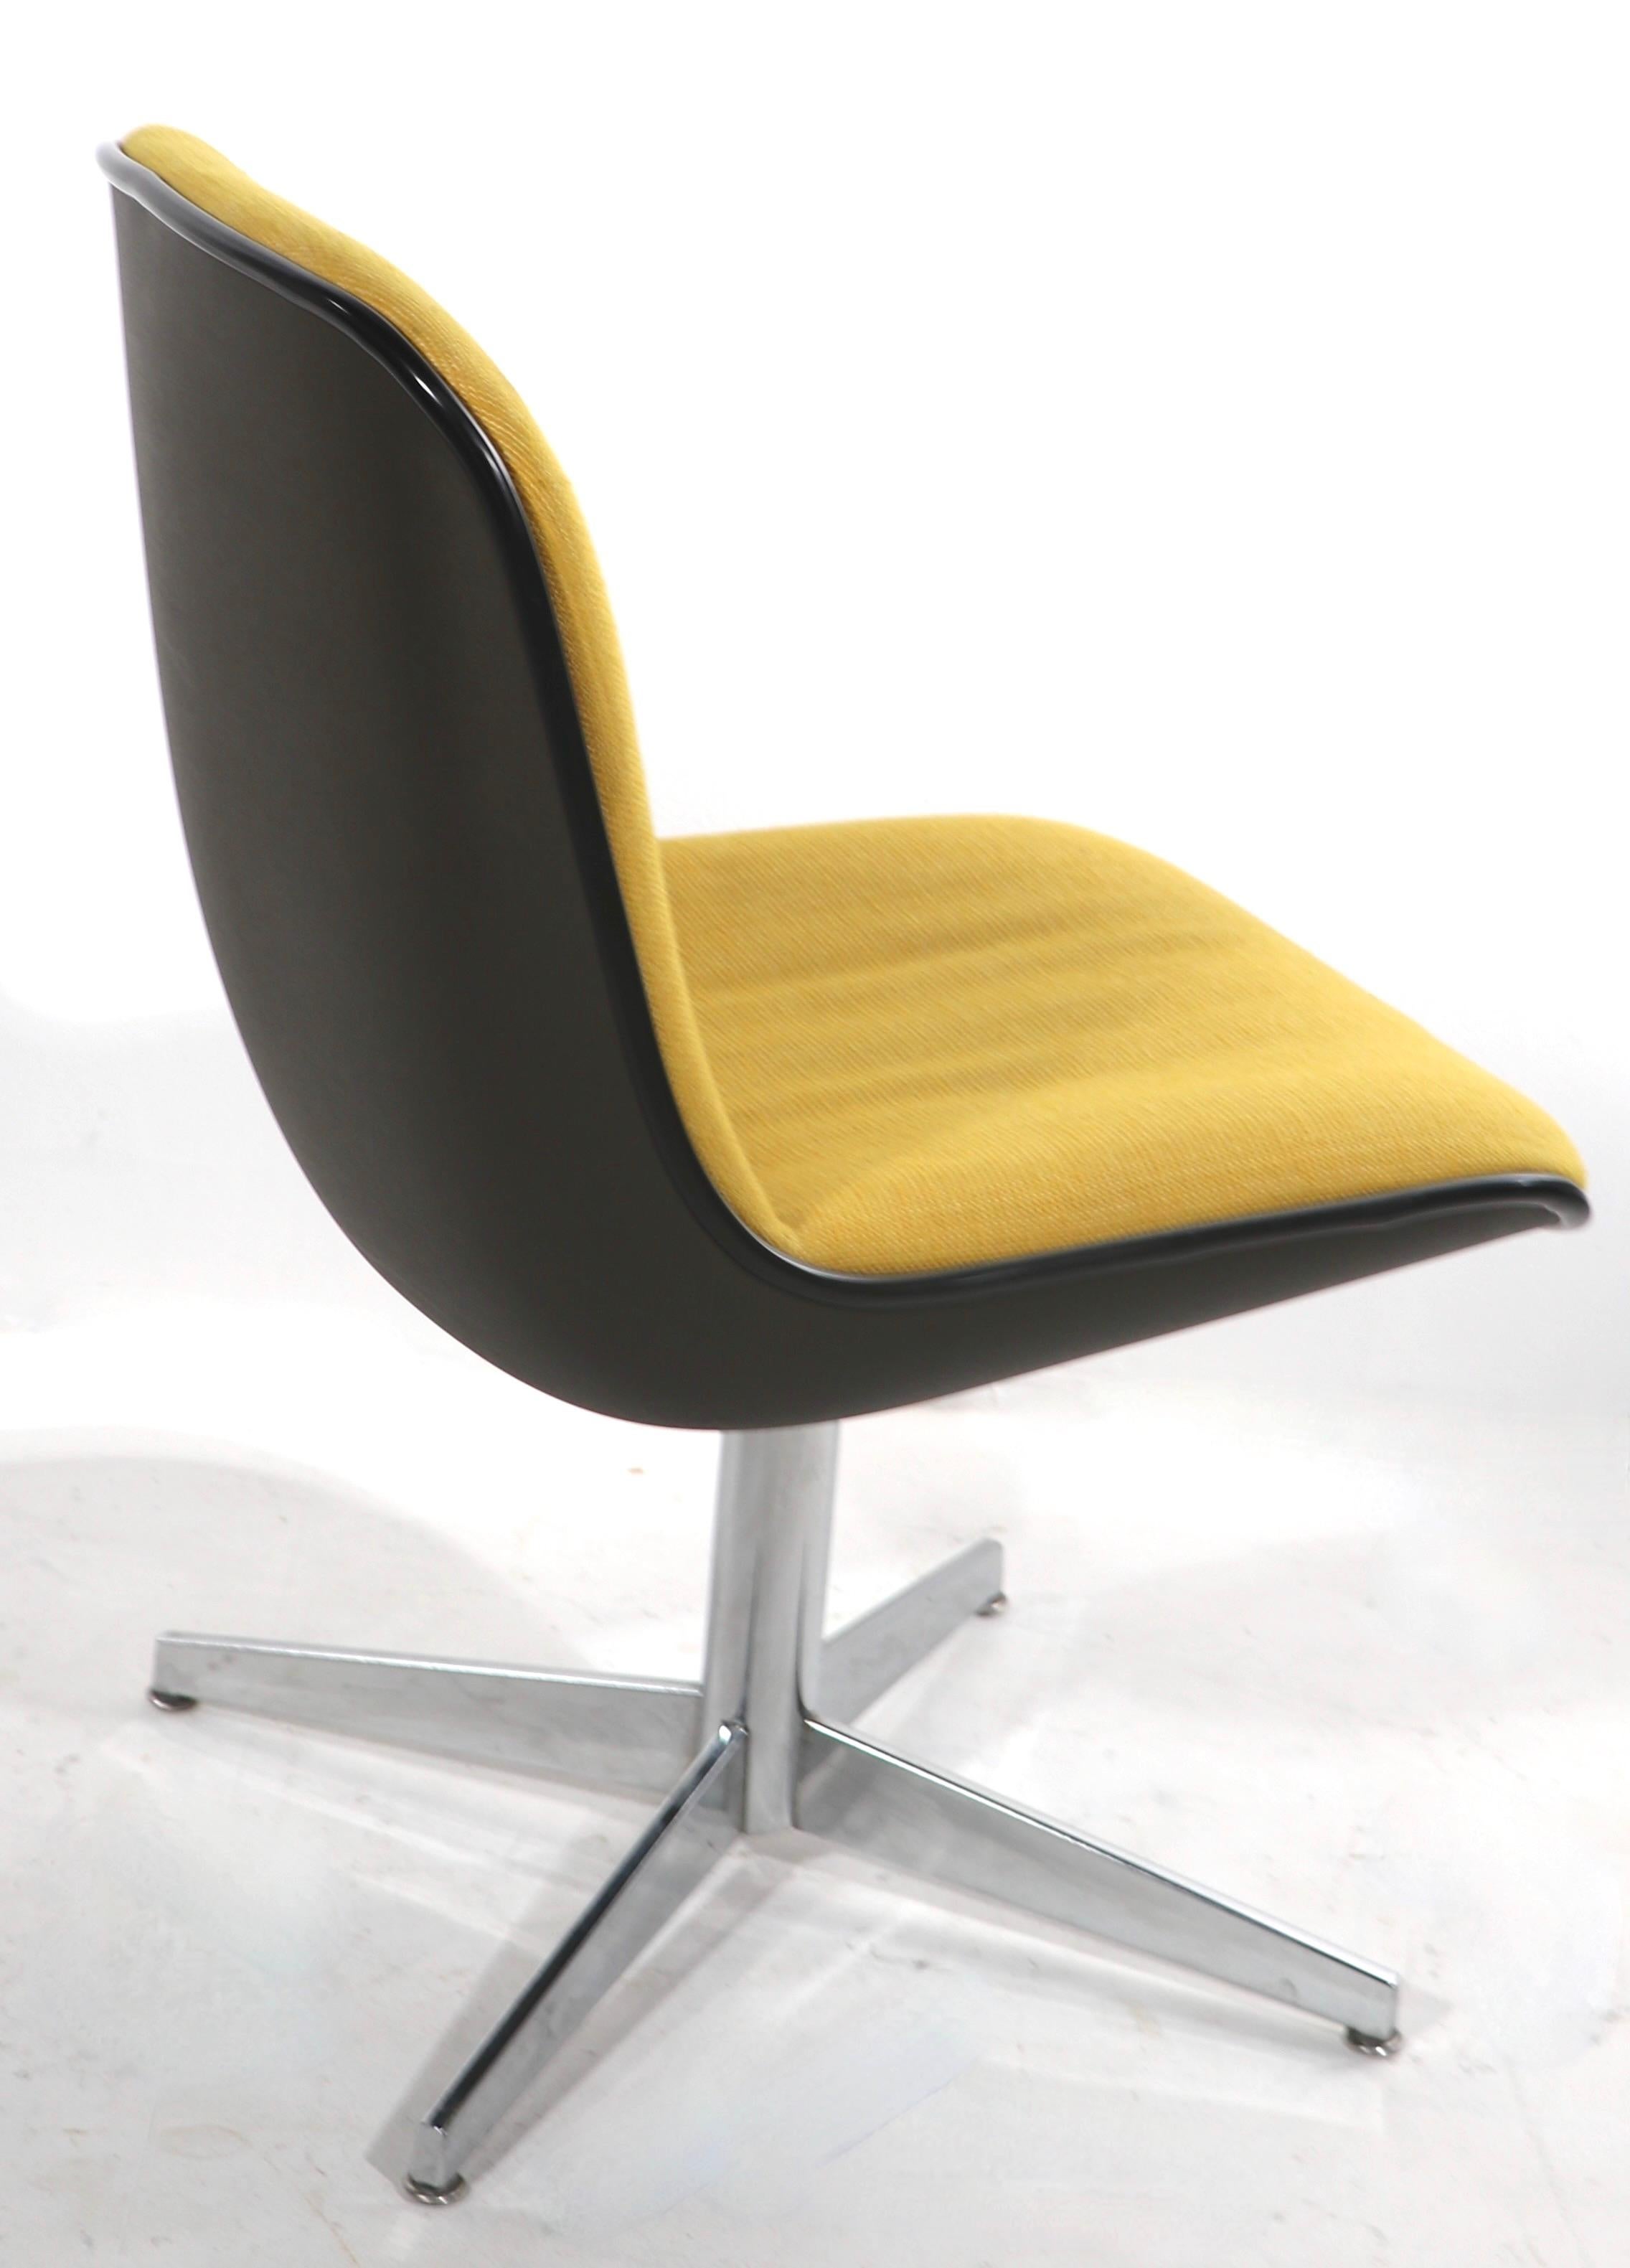 Chic architectural, ergonomic design office, side desk, dining chairs by Steelcase. The chairs feature yellow tweed continuous seats and backs, with dark gray plastic shells, on chrome base and lags. The chairs are stationary, ie they do not swivel